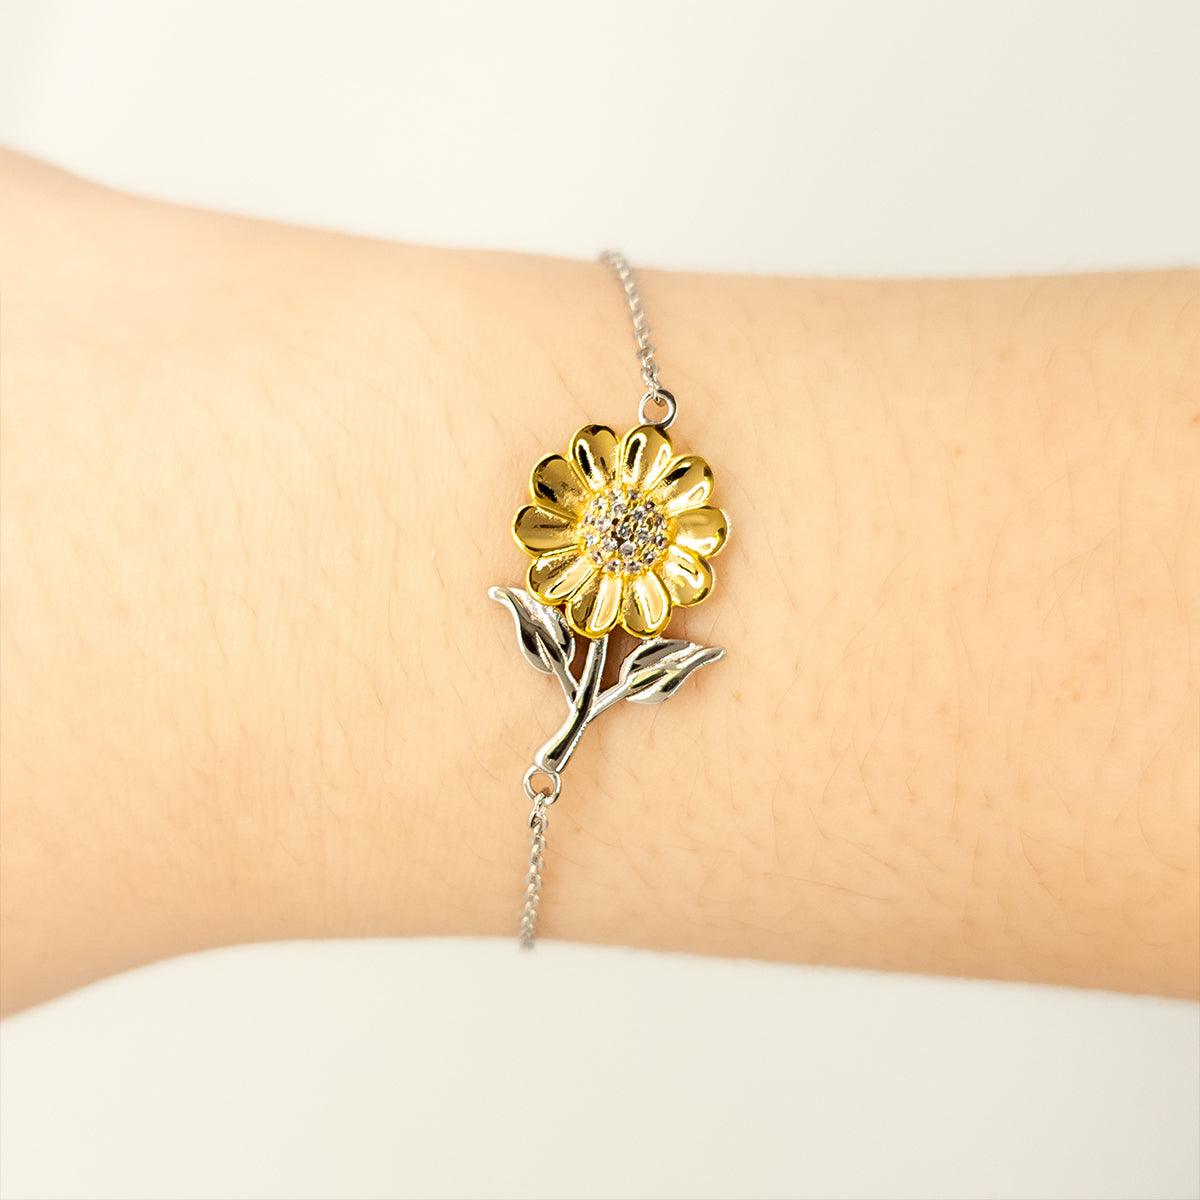 Motivational Sister-In-Law Sunflower Bracelet- I can promise to love you for the rest of my life, Birthday, Christmas Holiday Jewelry Gift - Mallard Moon Gift Shop